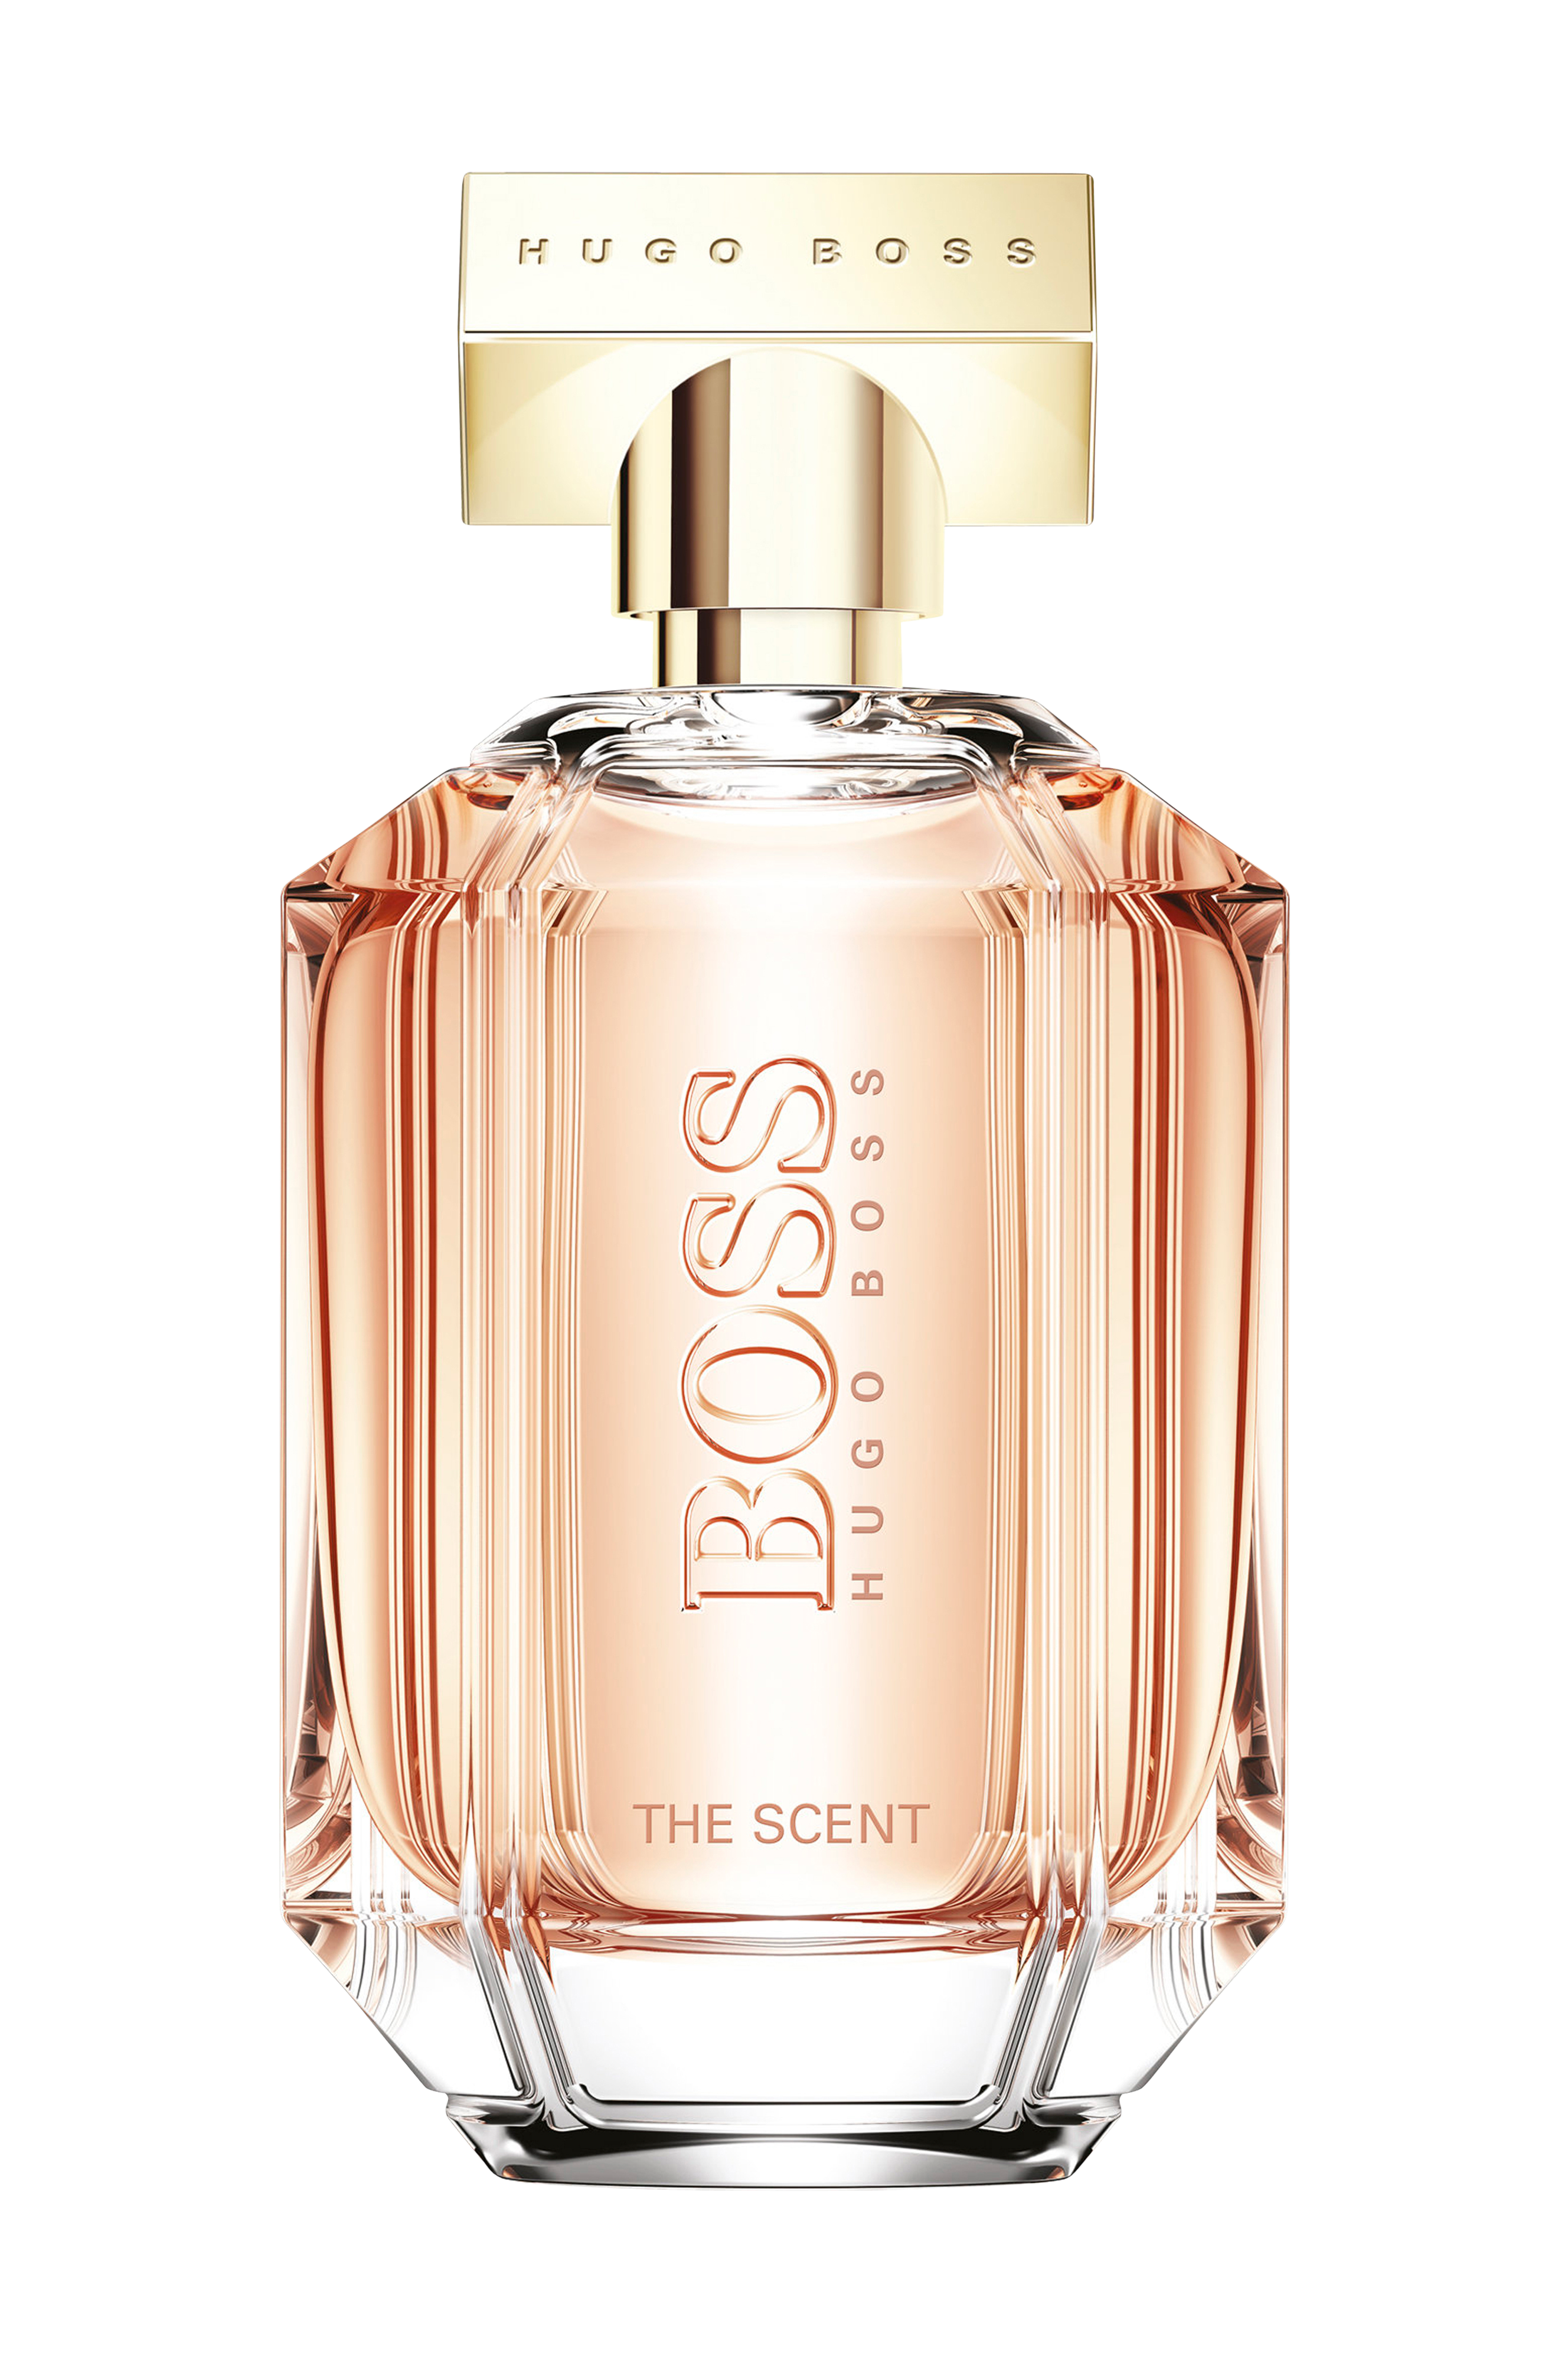 Хуго босс сент. Hugo Boss the Scent private Accord for her. Boss Hugo Boss женские the Scent. Туалетная вода Boss the Scent for her, 100 мл. Boss Hugo Boss the Scent Pure Accord.